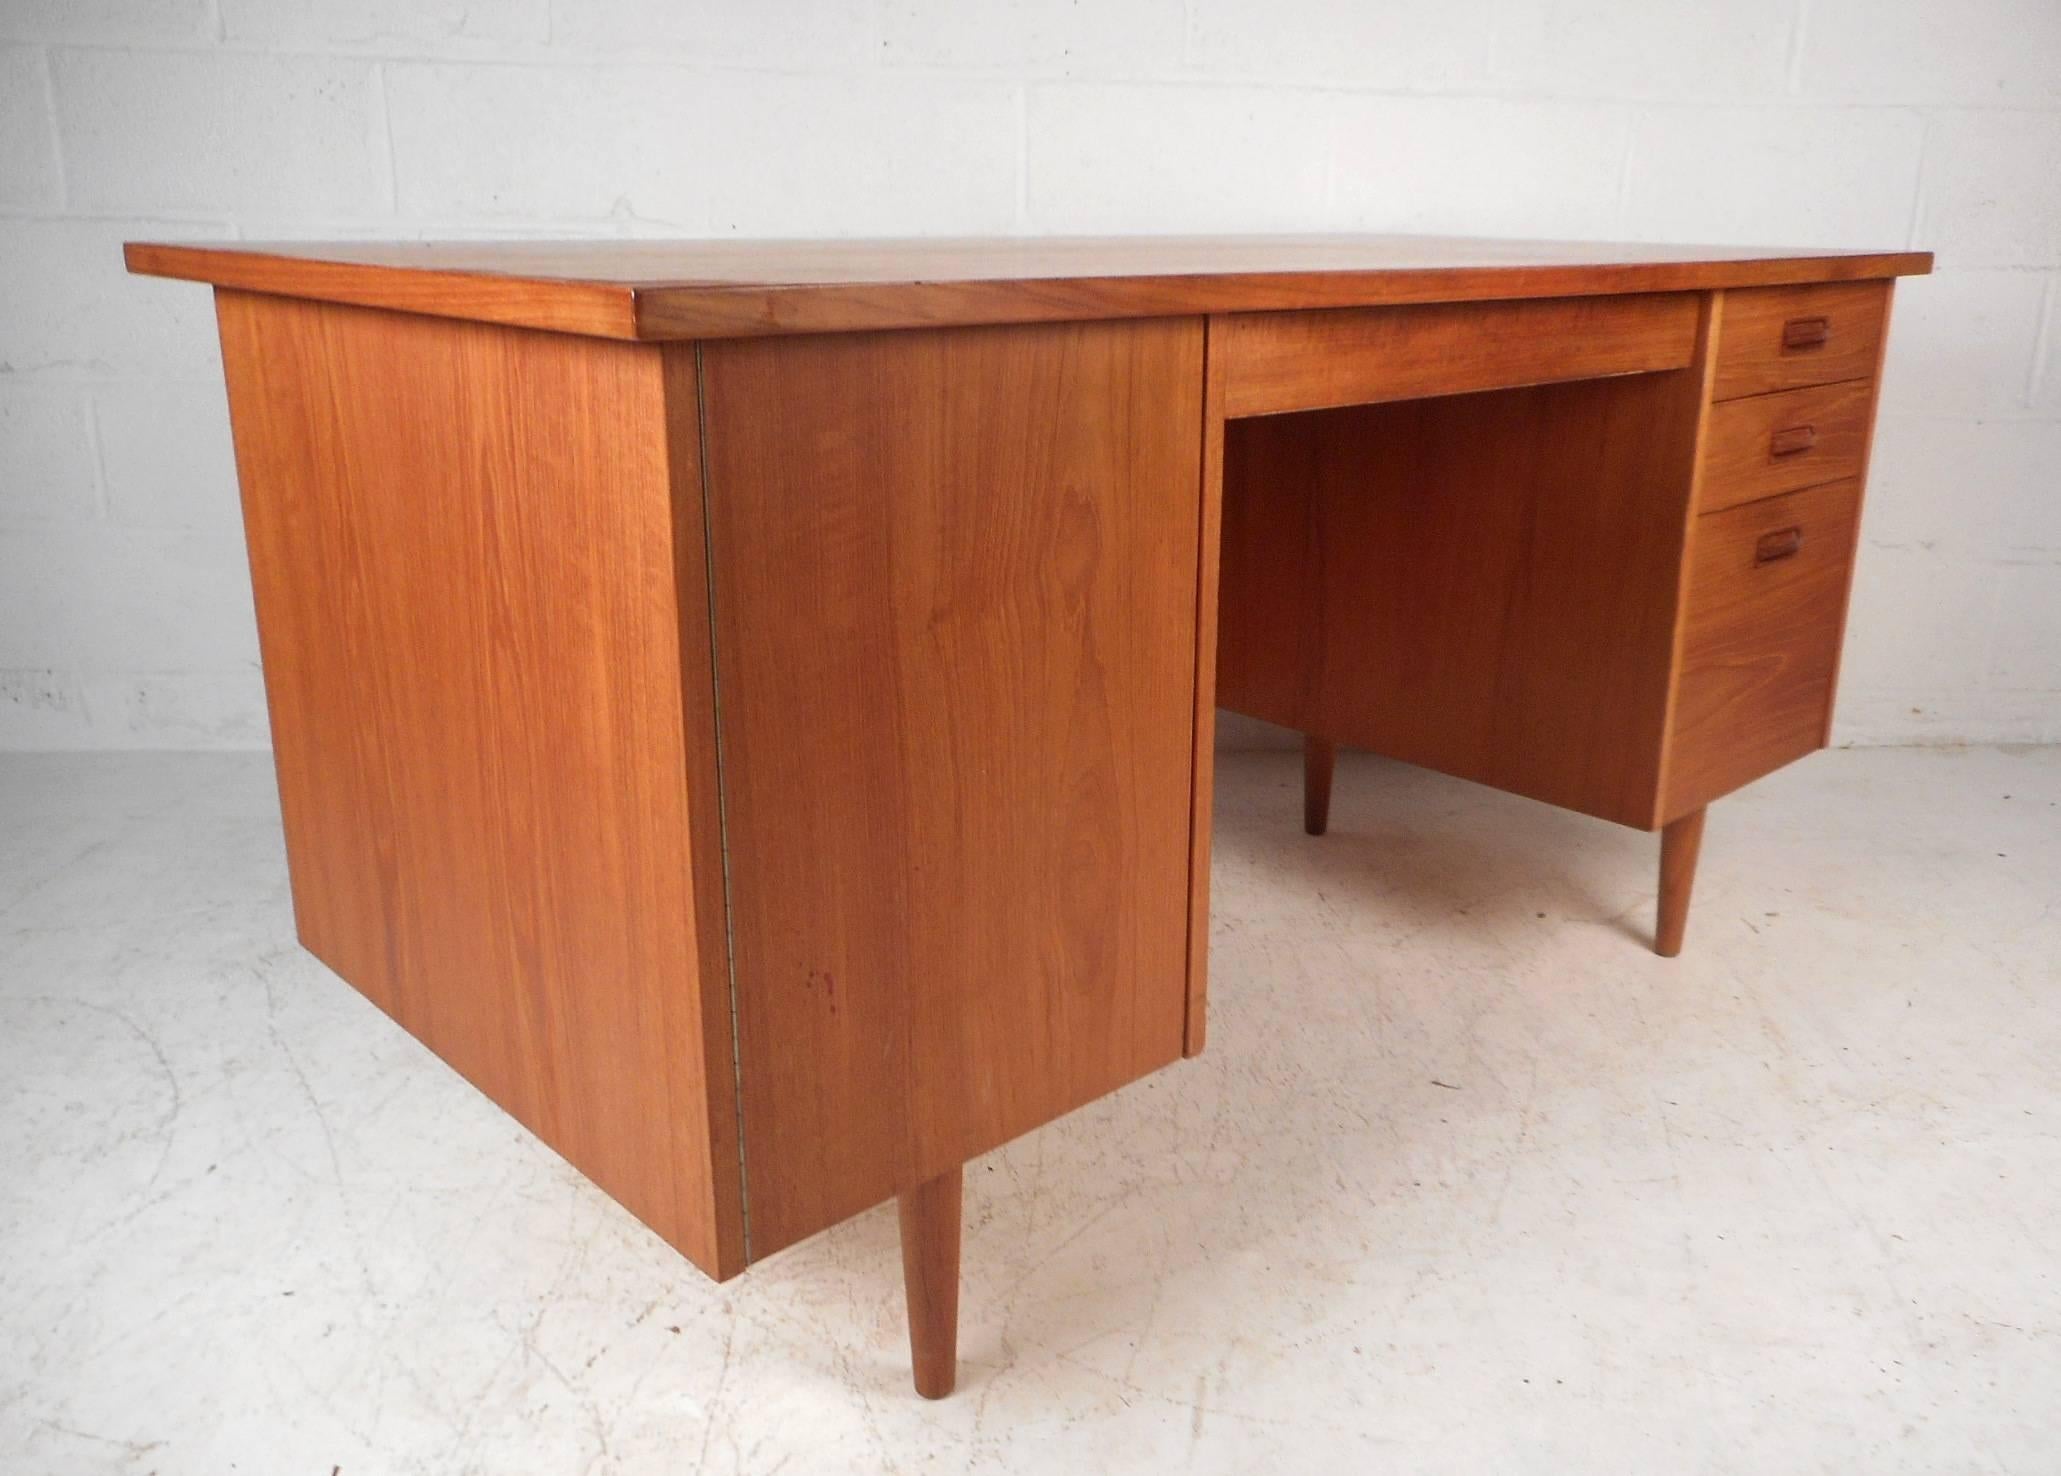 This impressive vintage modern desk features plenty of work space on its 58 inch wide by 29 inch deep top. This beautiful case piece offers plenty of room for storage within its hidden compartment with a shelf, middle drawer, and three side drawers.